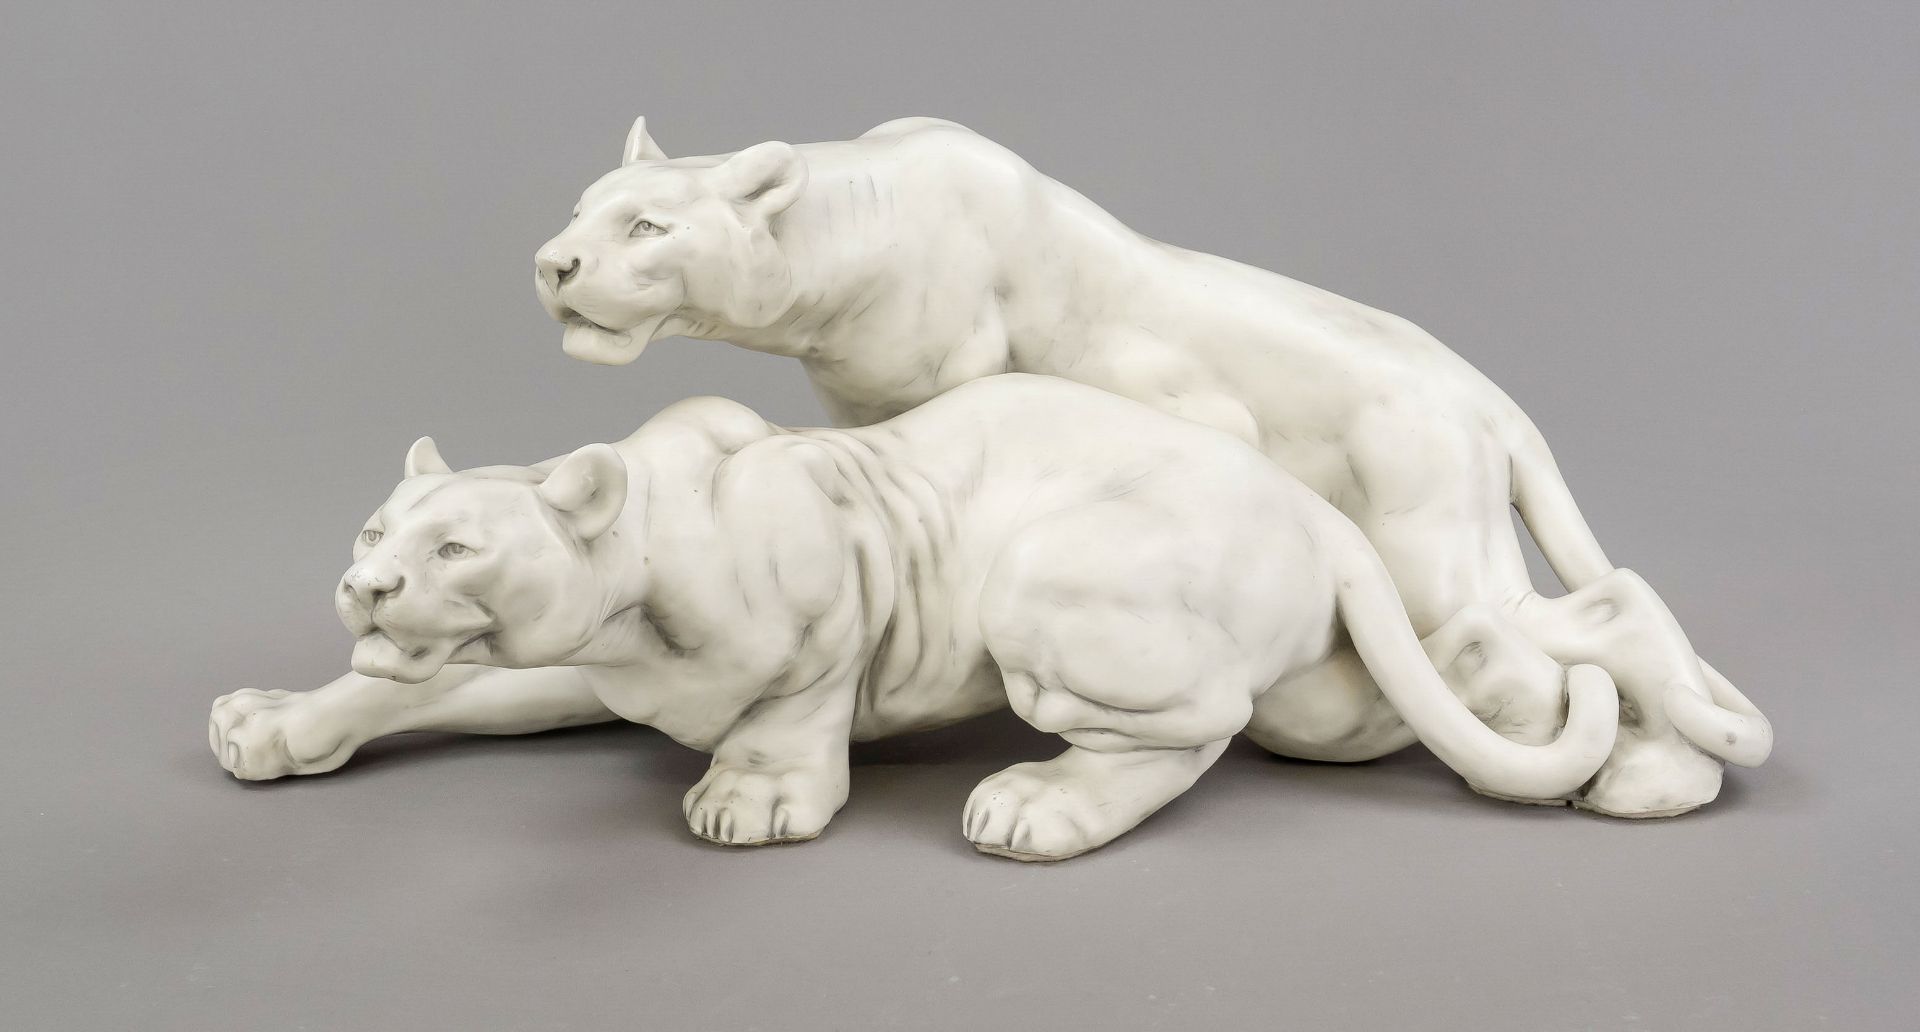 Large lion group, 20th century, masterly sculpture of two cats of prey in a creeping pose, white,